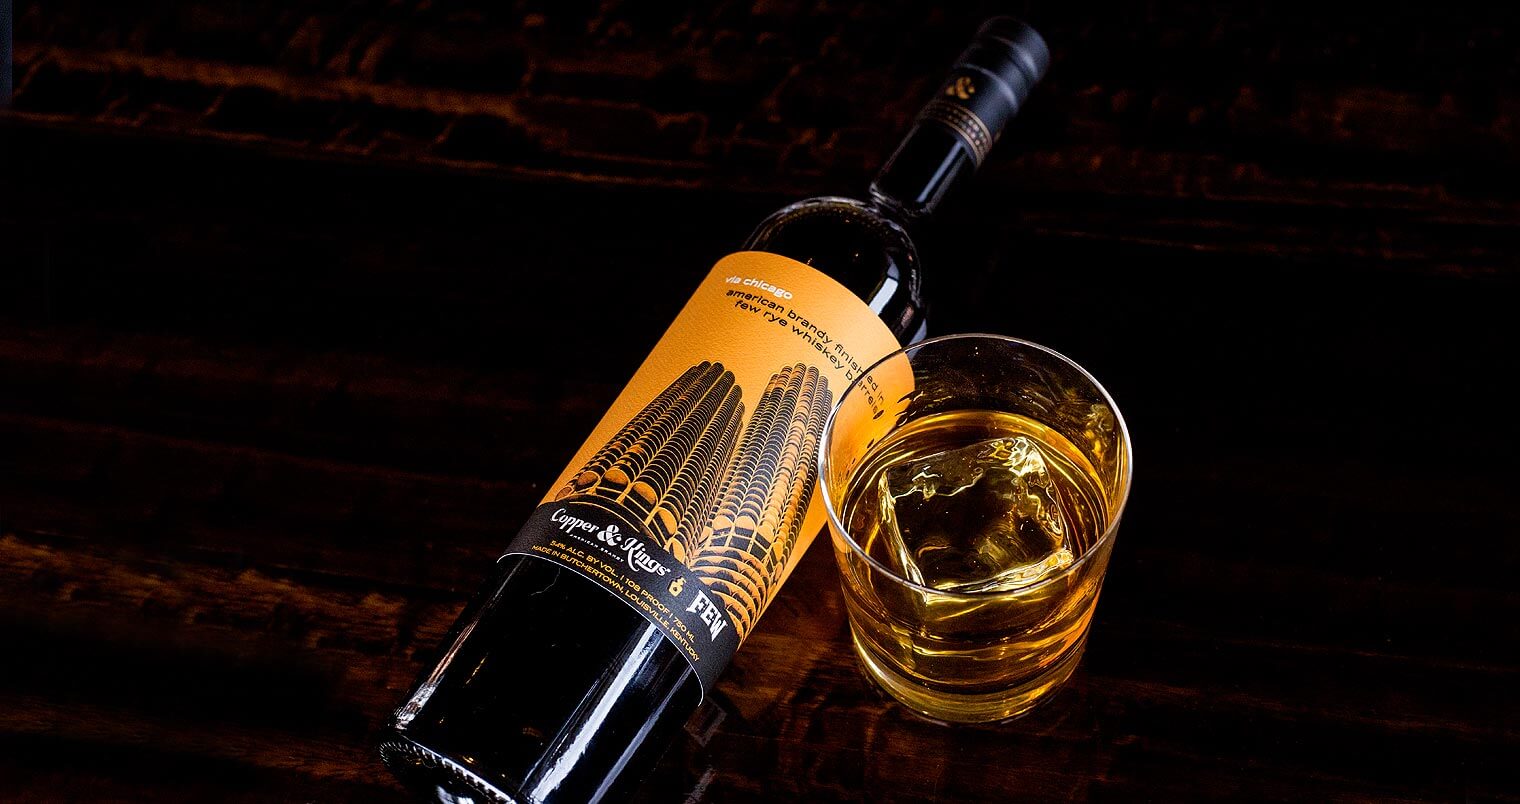 Copper & Kings via chicago, bottle and glass, featured image